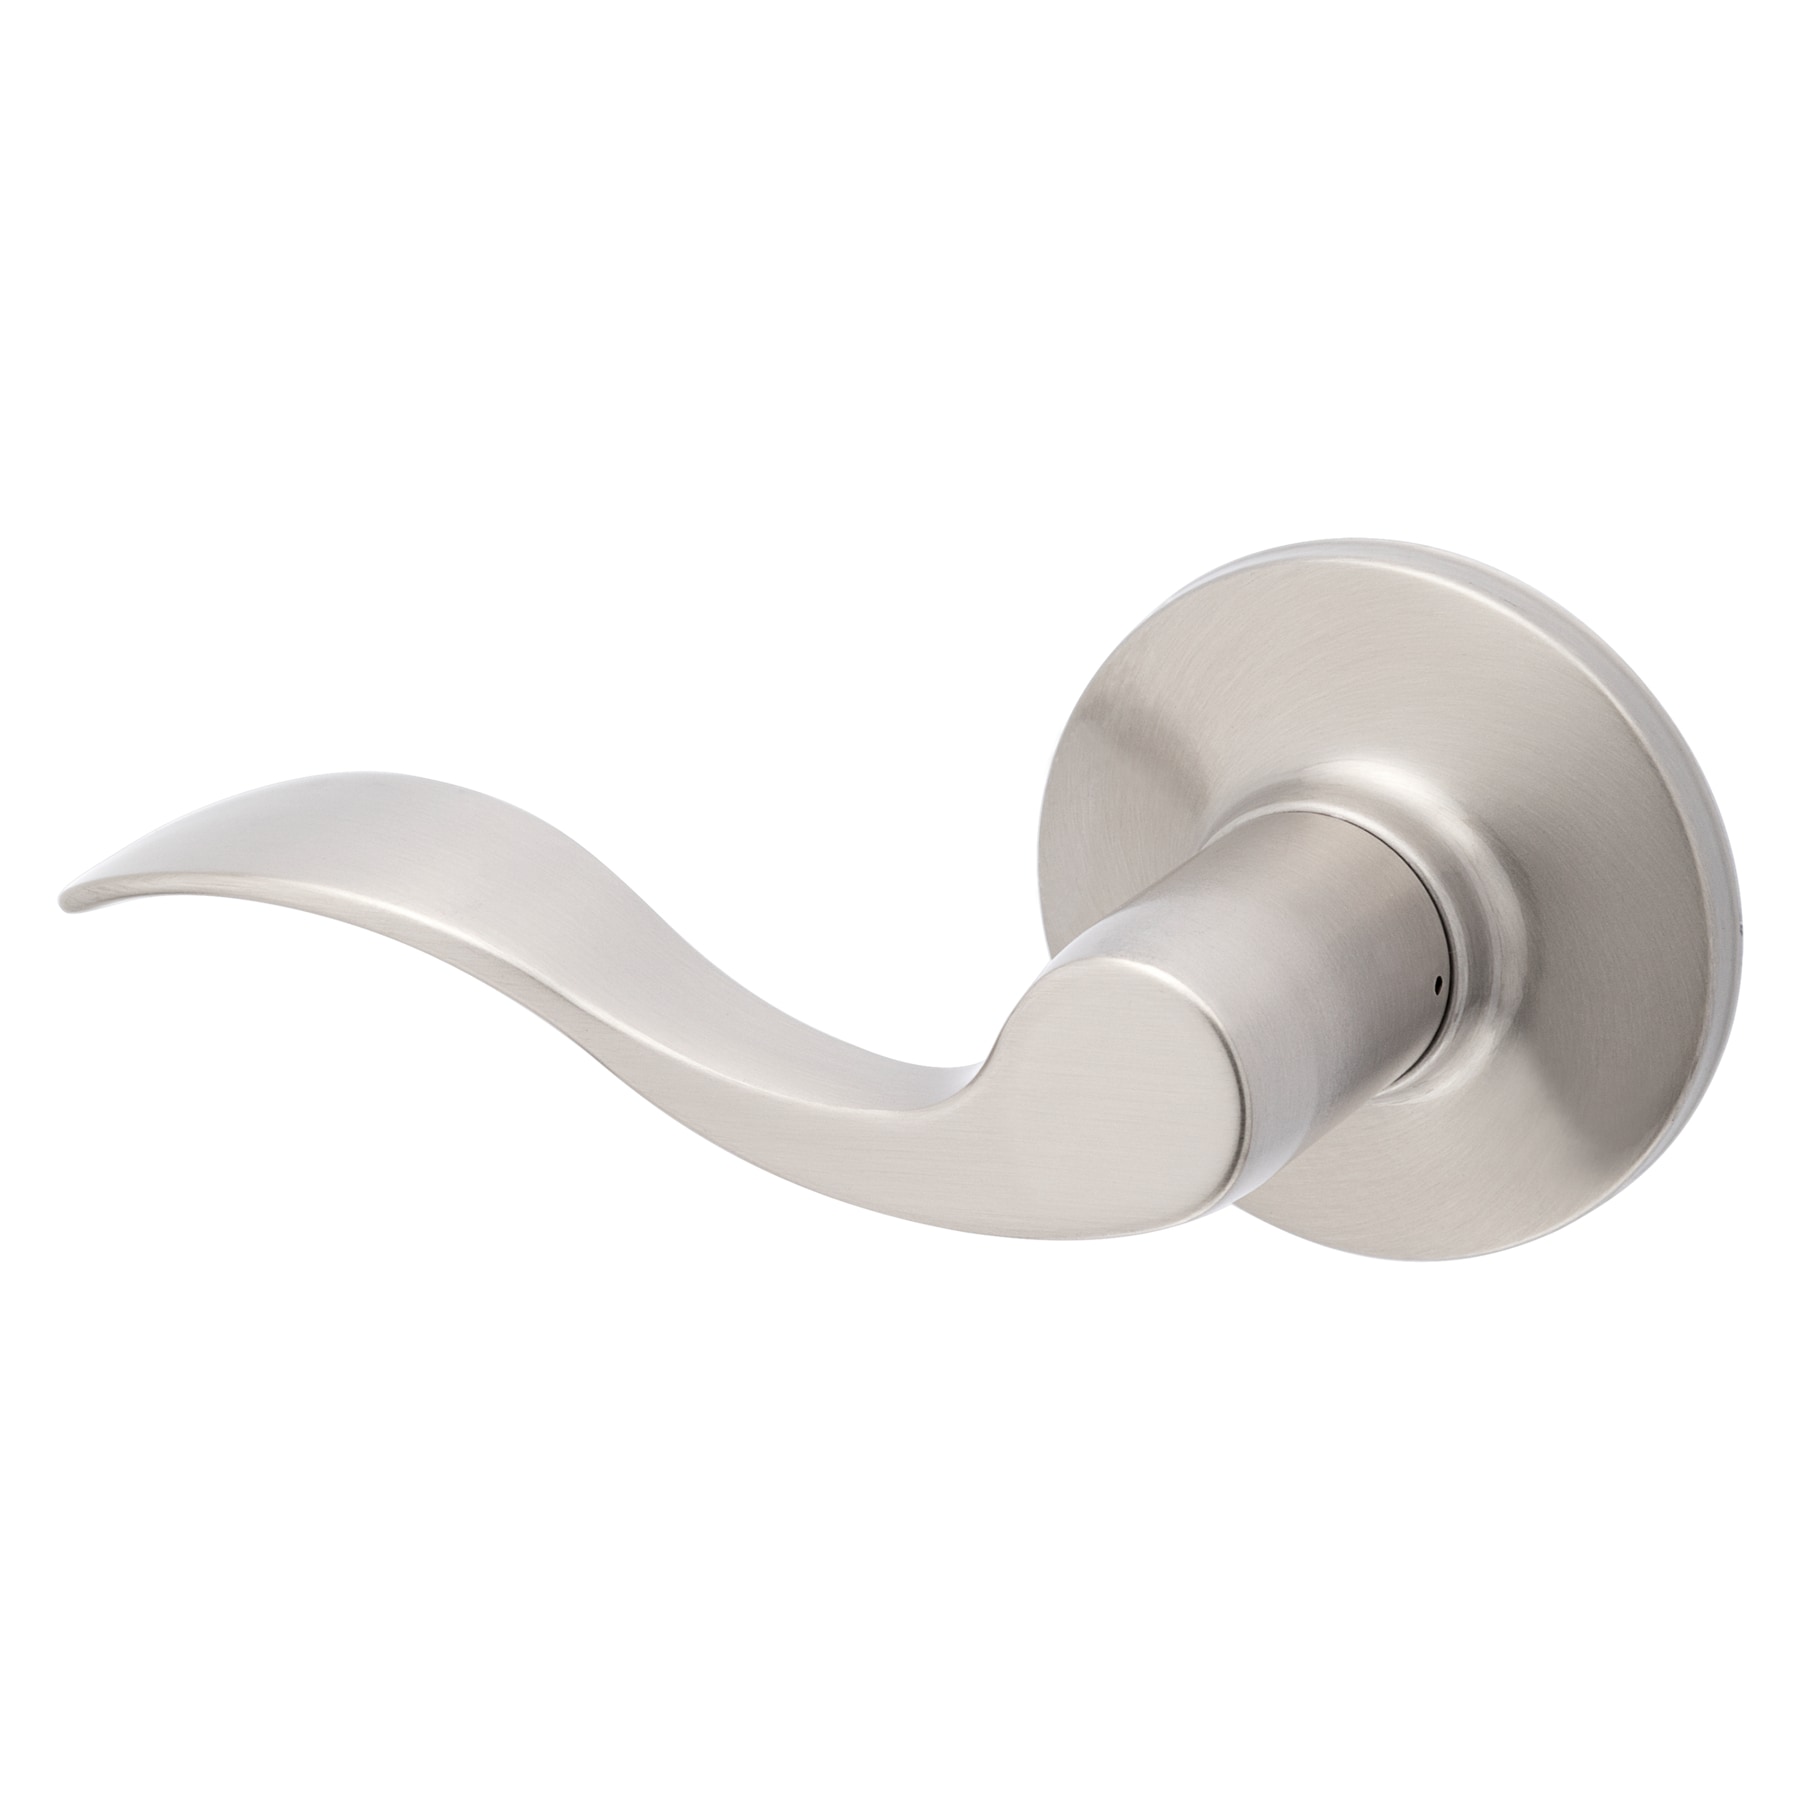 Inactive Dummy Handleset with Accent Left-Handed Lever and Right,Satin Nickel MDHST2017SN-D-AMZ 